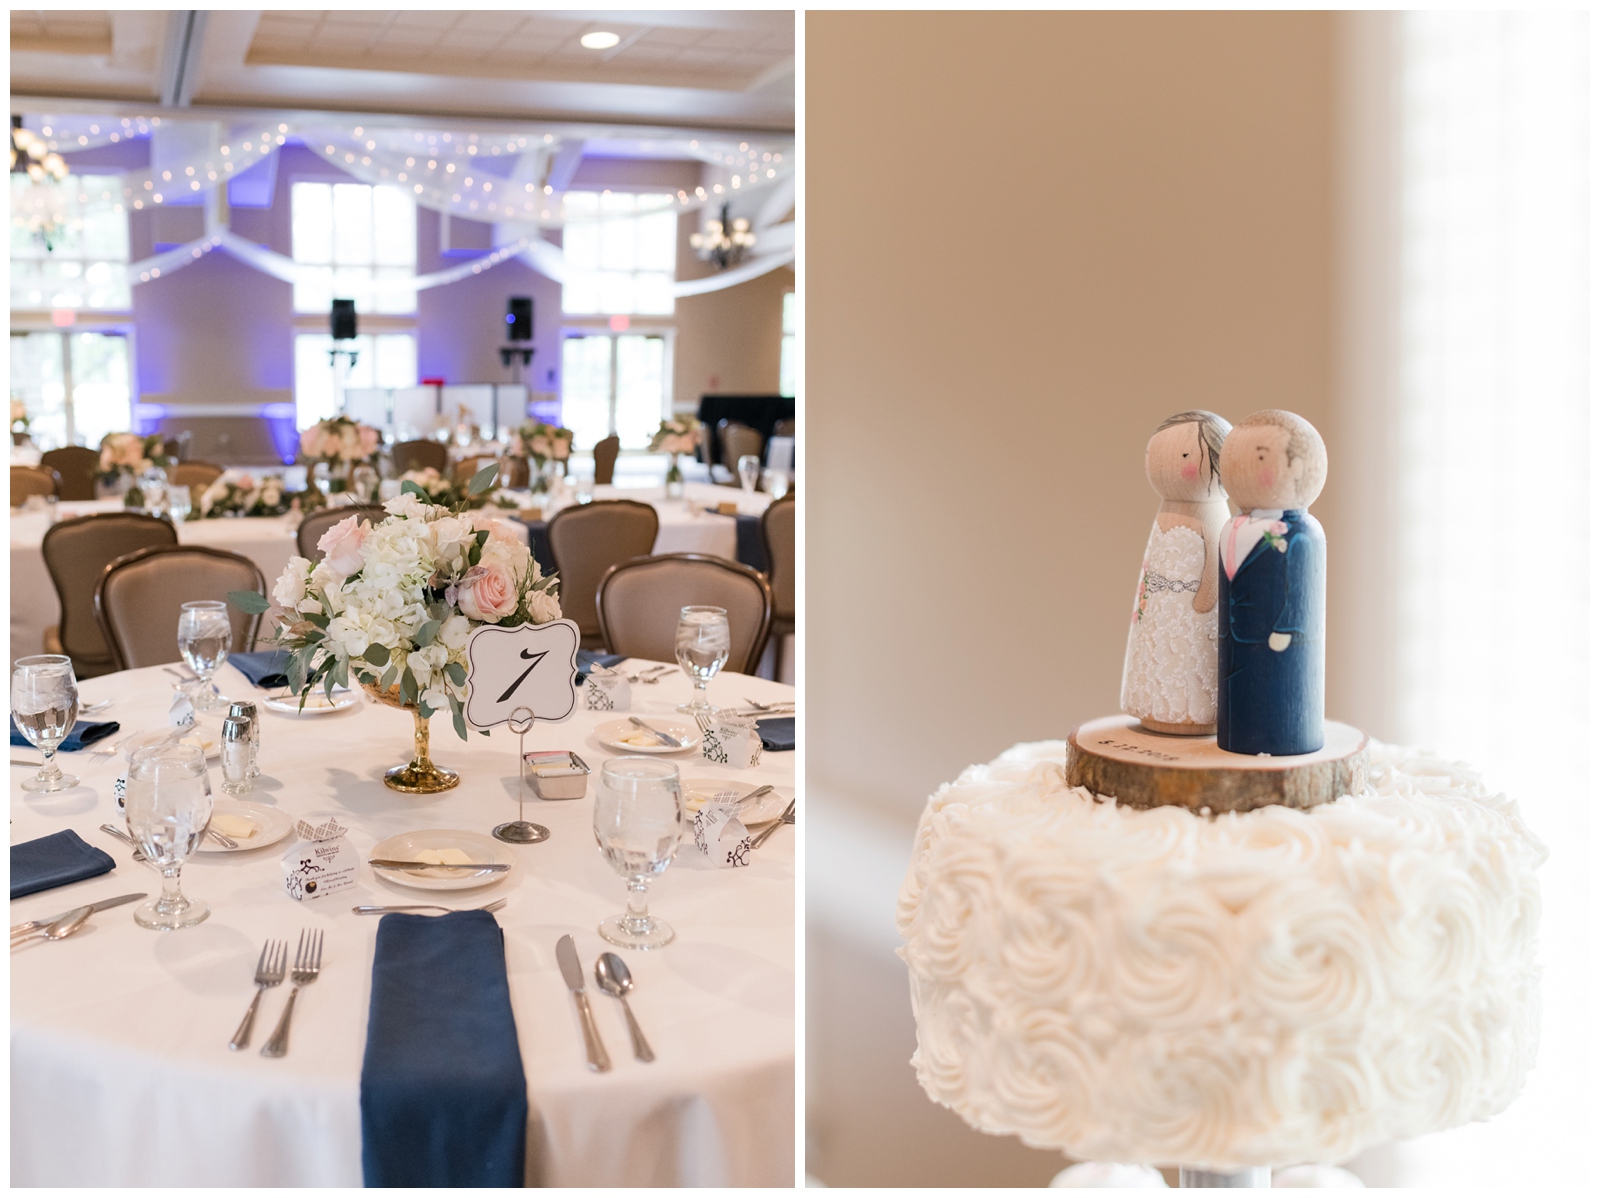 wedding reception tables with navy napkins and script number centerpieces and wooden figurines of bride and groom atop wedding cake